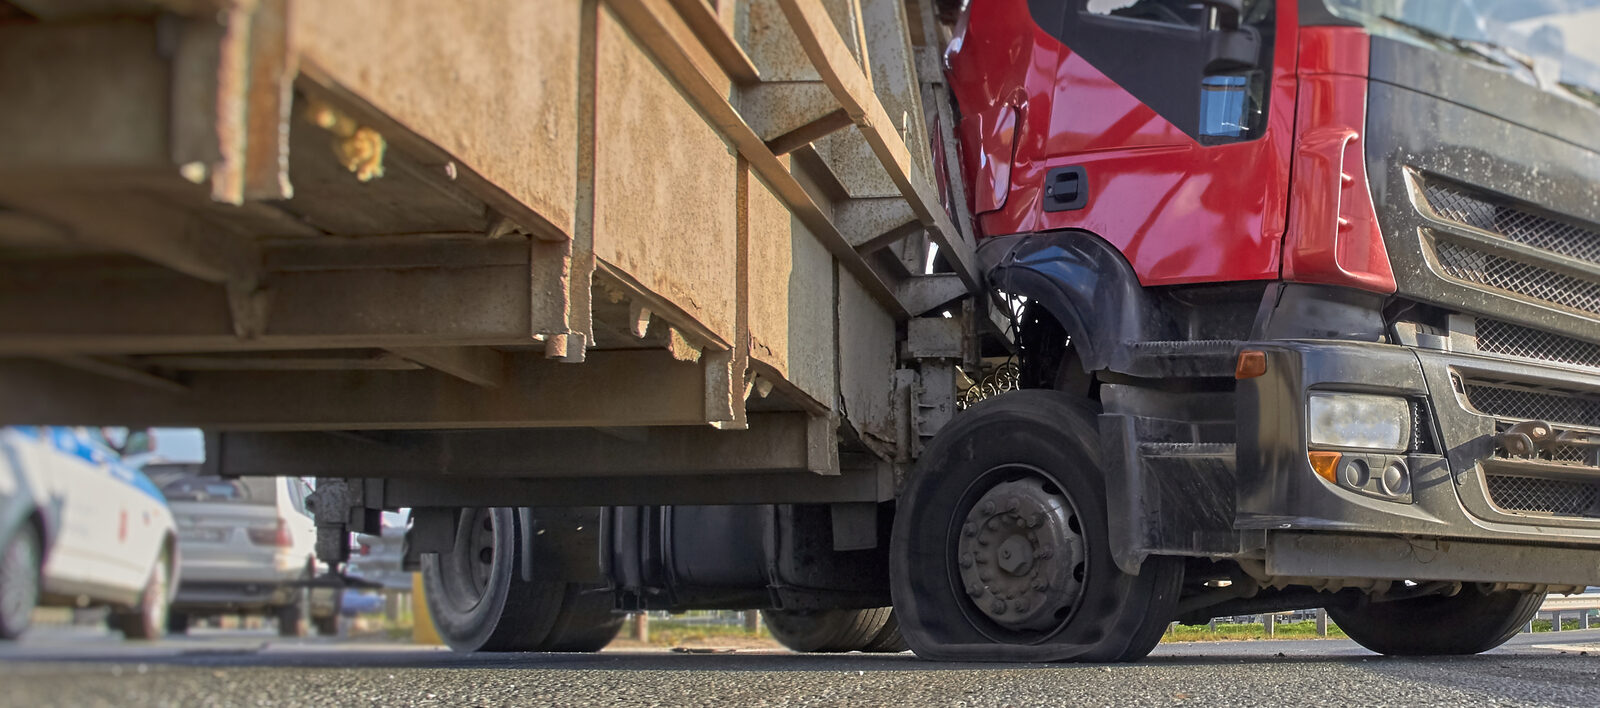 Truck Accident Law Firm for Illinois Cases | Bartlett, IL Truck Crash Attorneys | Burger Law